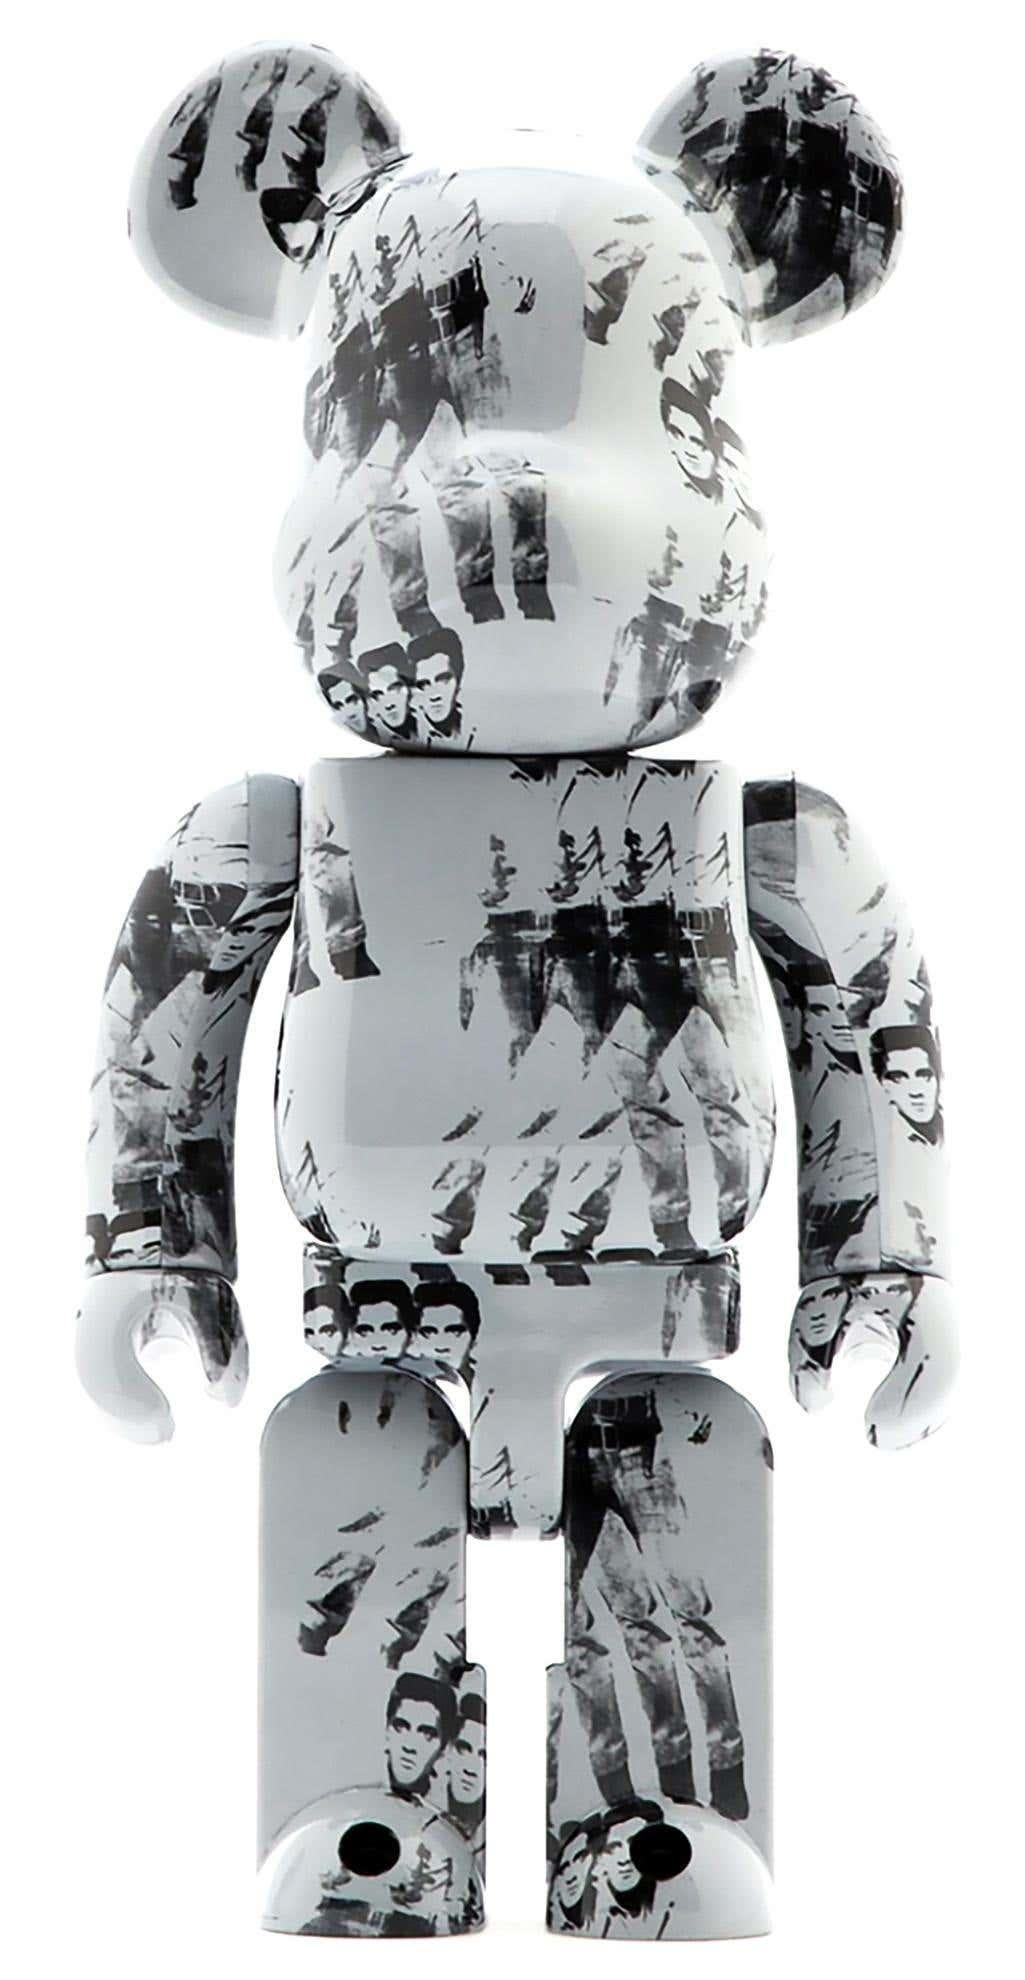 Bearbrick x Andy Warhol Foundation 400% Vinyl Figures: Set of four individual works (2020-2021):
Andy Warhol (after) Muhammad Ali, Elvis & Marilyn (pink & blue variations) collectibles trademarked & licensed by the Estate of Andy Warhol. The